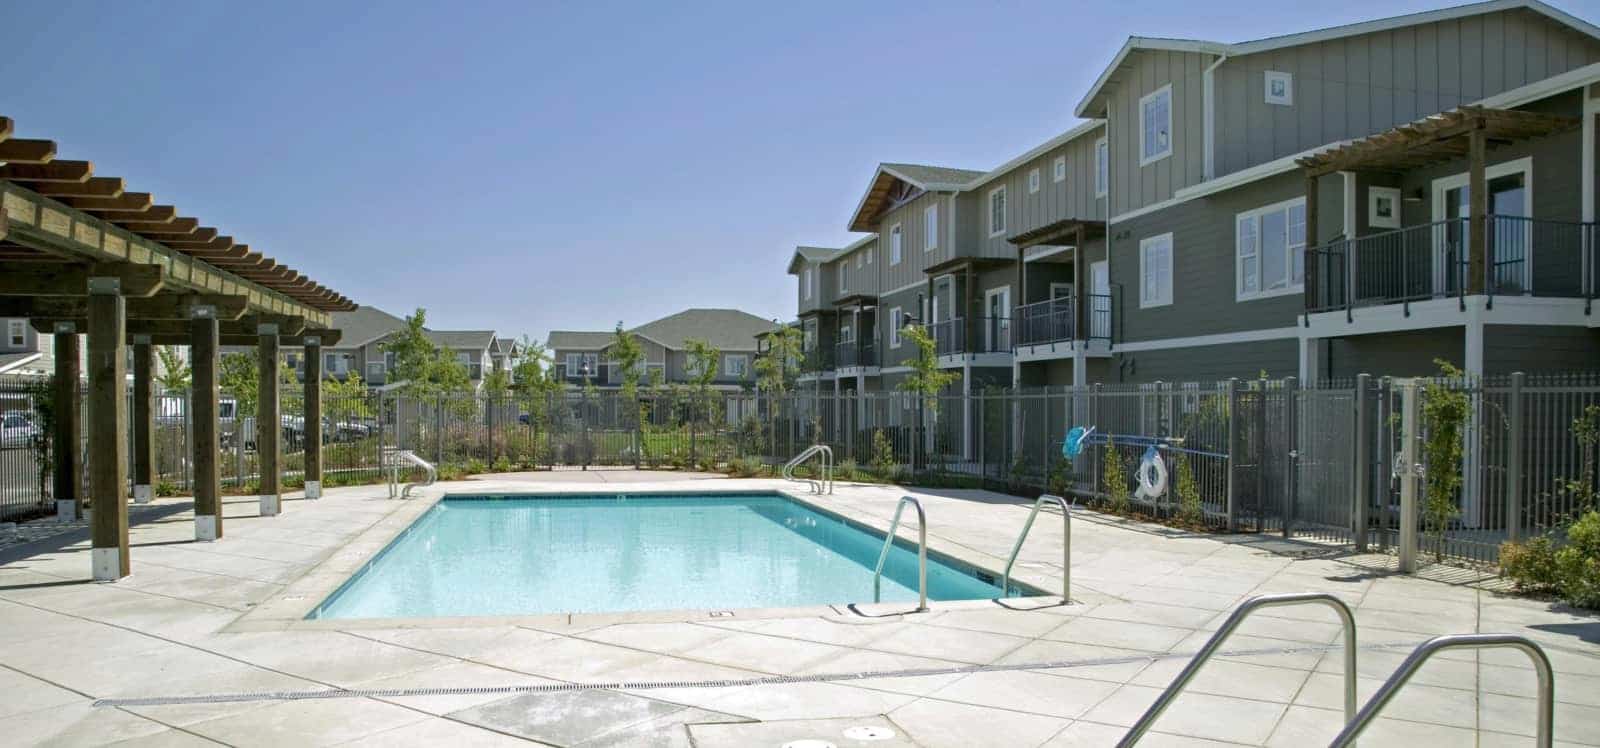 View of the pool area with the apartment buildings in the background.